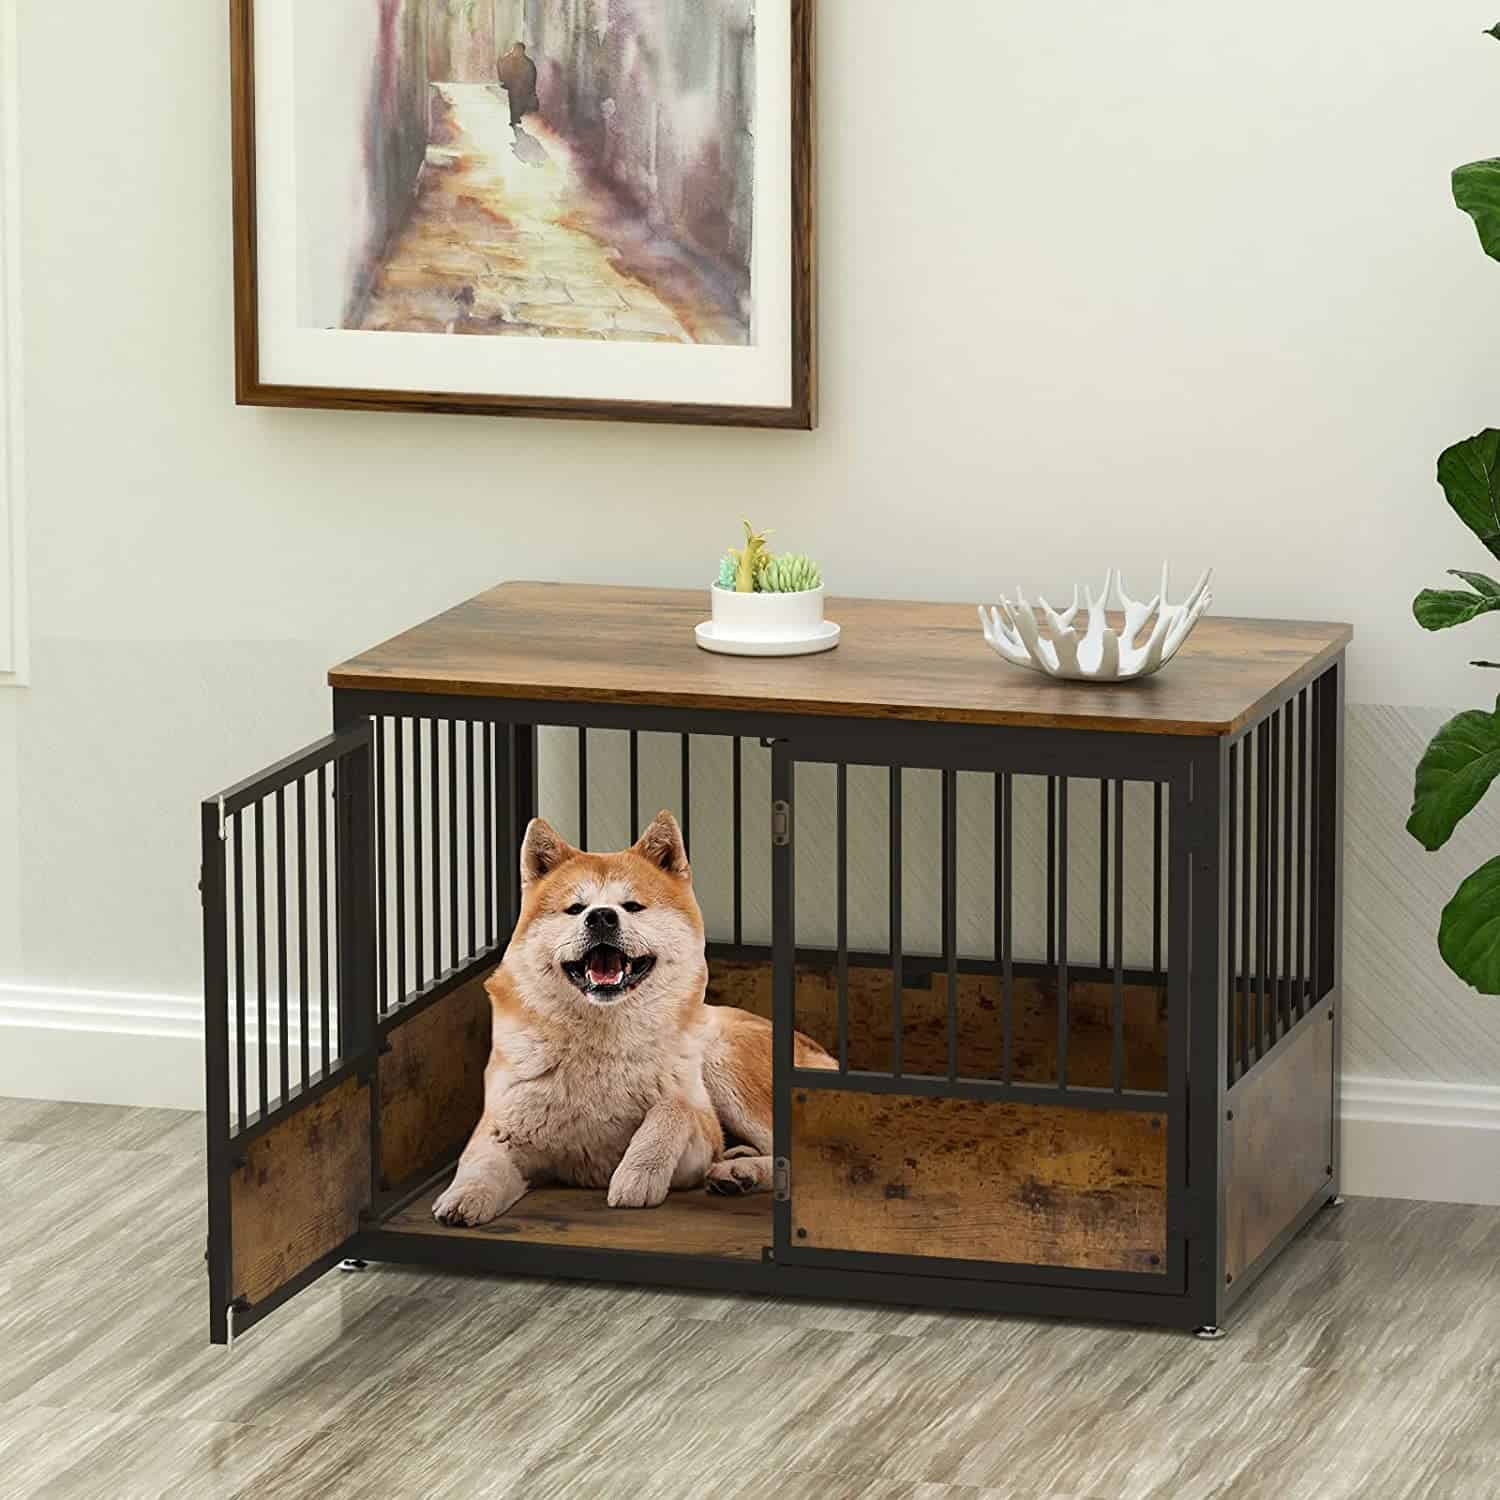 dog in the Snimoy Dog Crate Furniture